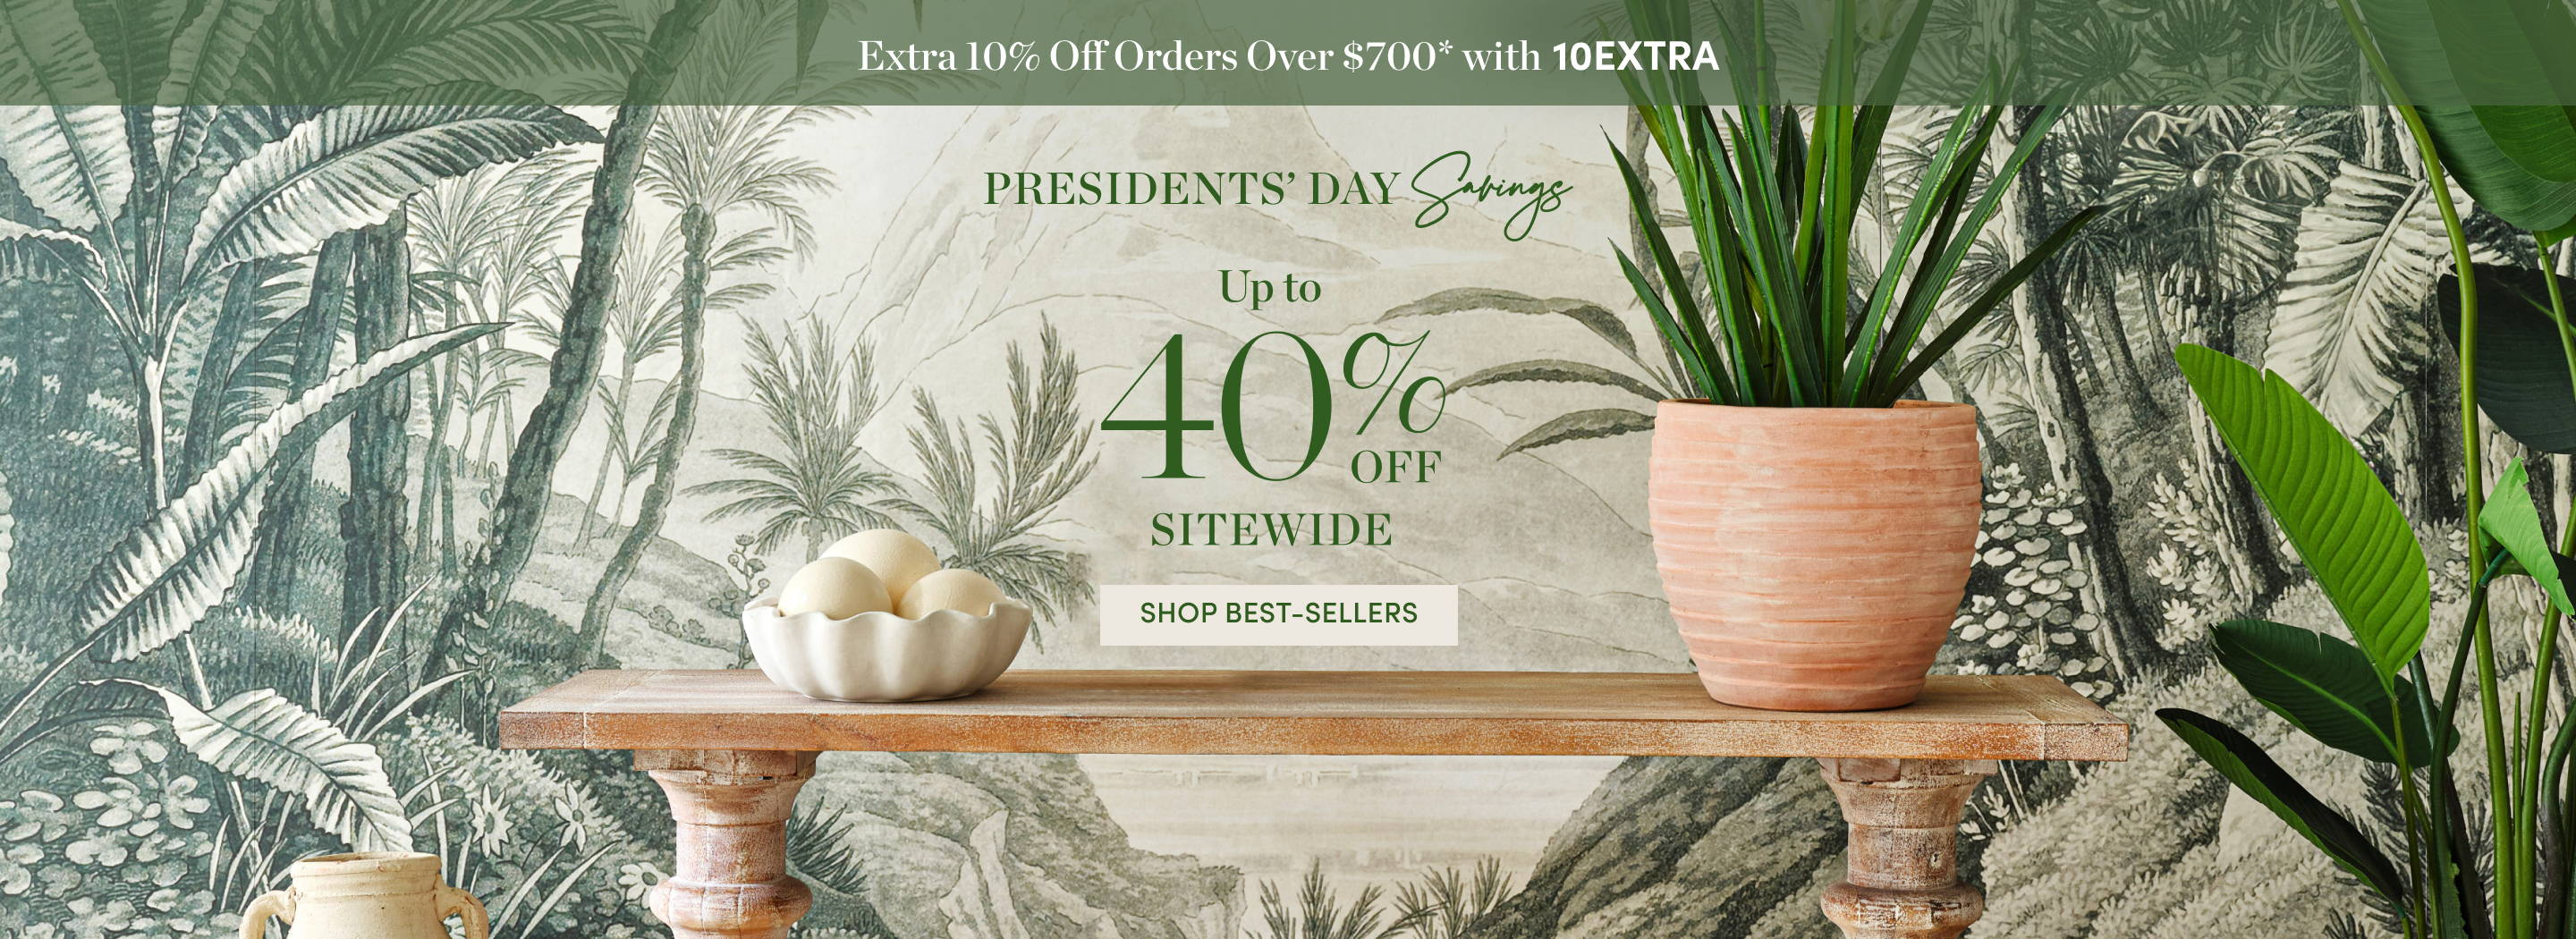 Presidents' Day Savings Up to 40% Off Sitewide Shop Best-Sellers